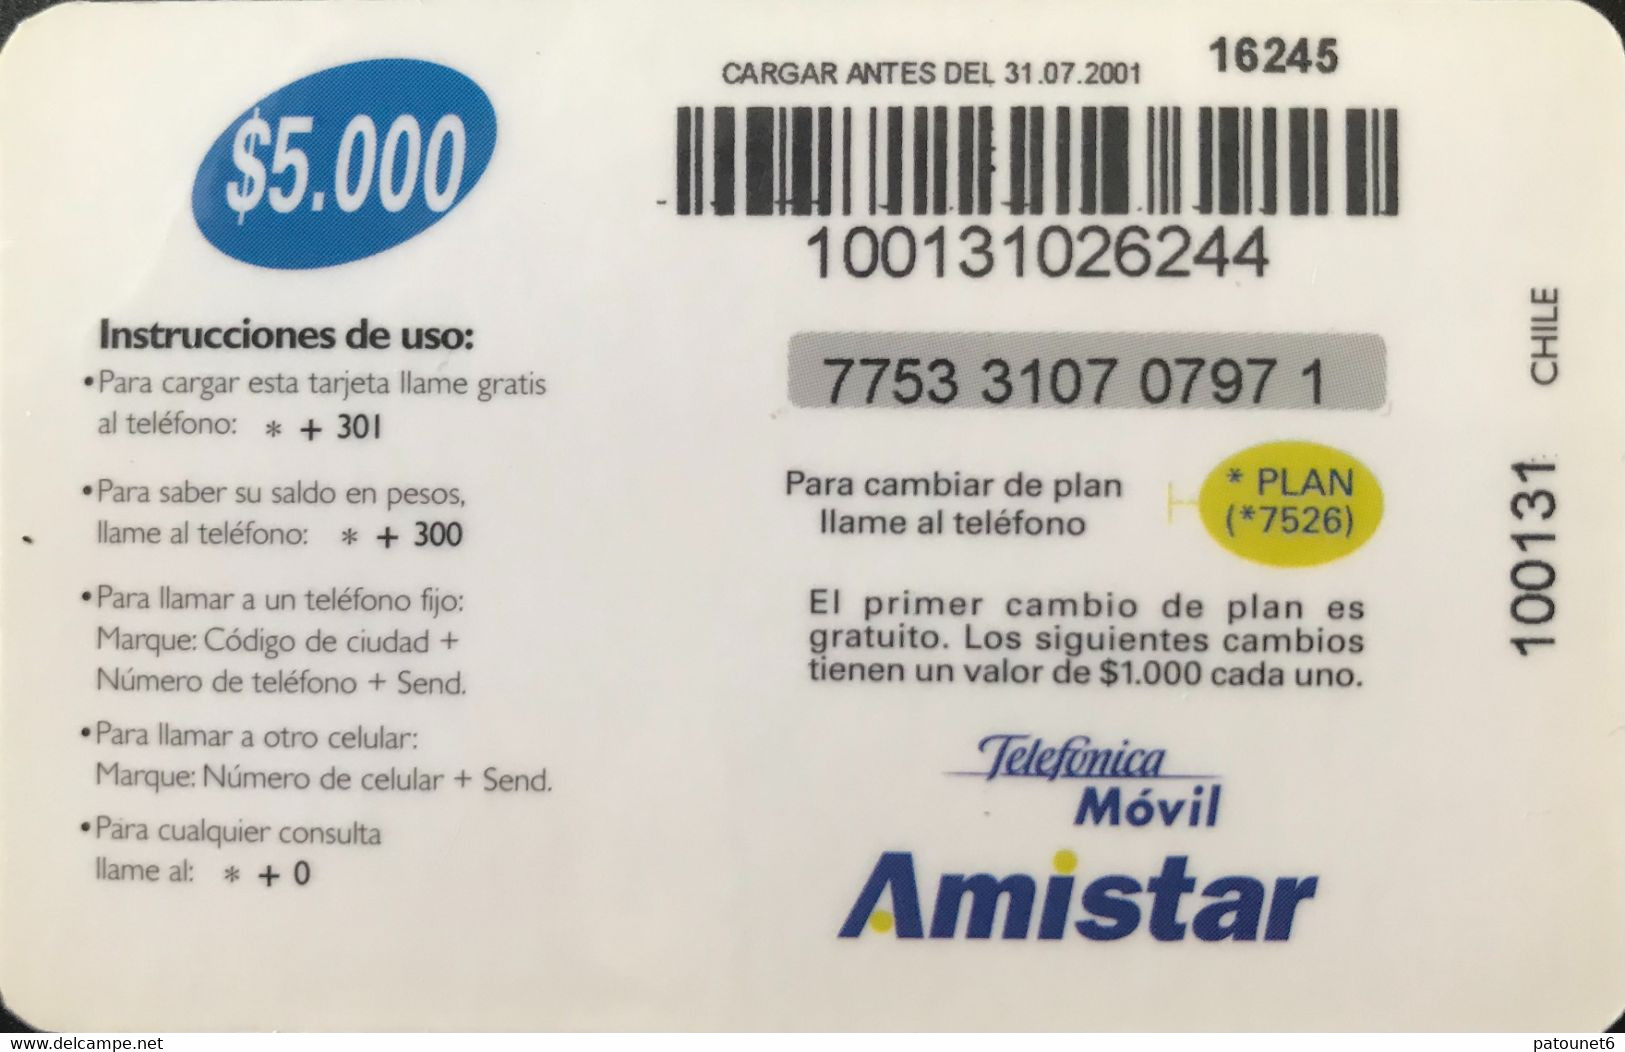 CHILI  -  Recharge  -  Movil - Amistar  -  $ 5.000 - Chile